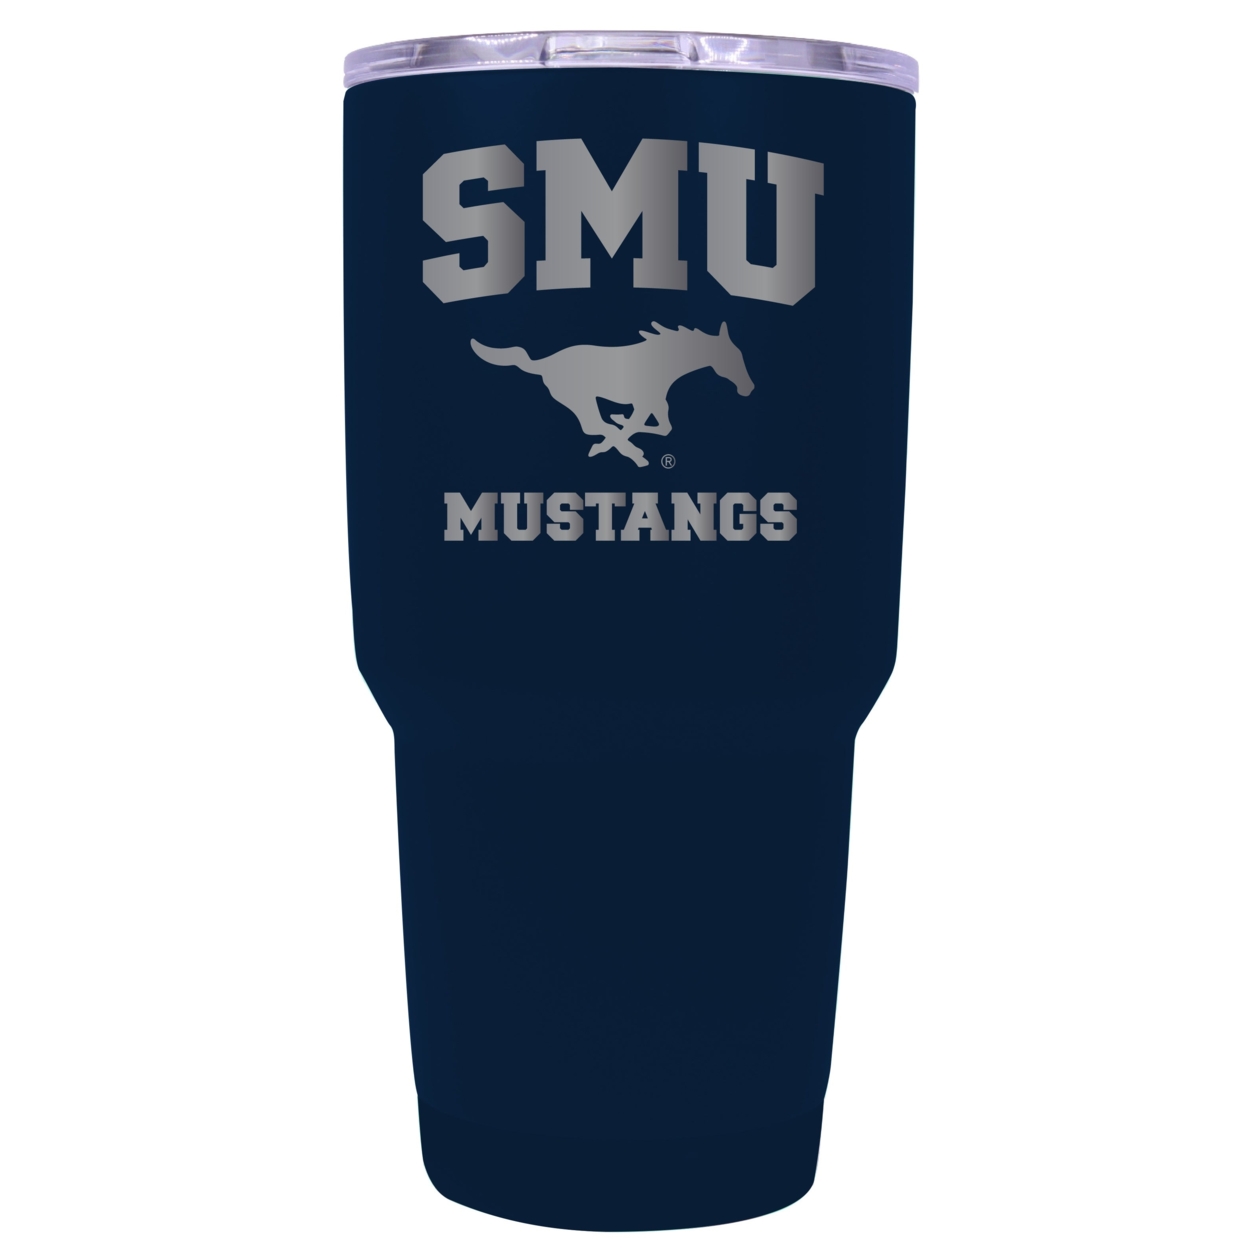 Southern Methodist University 24 Oz Laser Engraved Stainless Steel Insulated Tumbler - Choose Your Color. - Seafoam